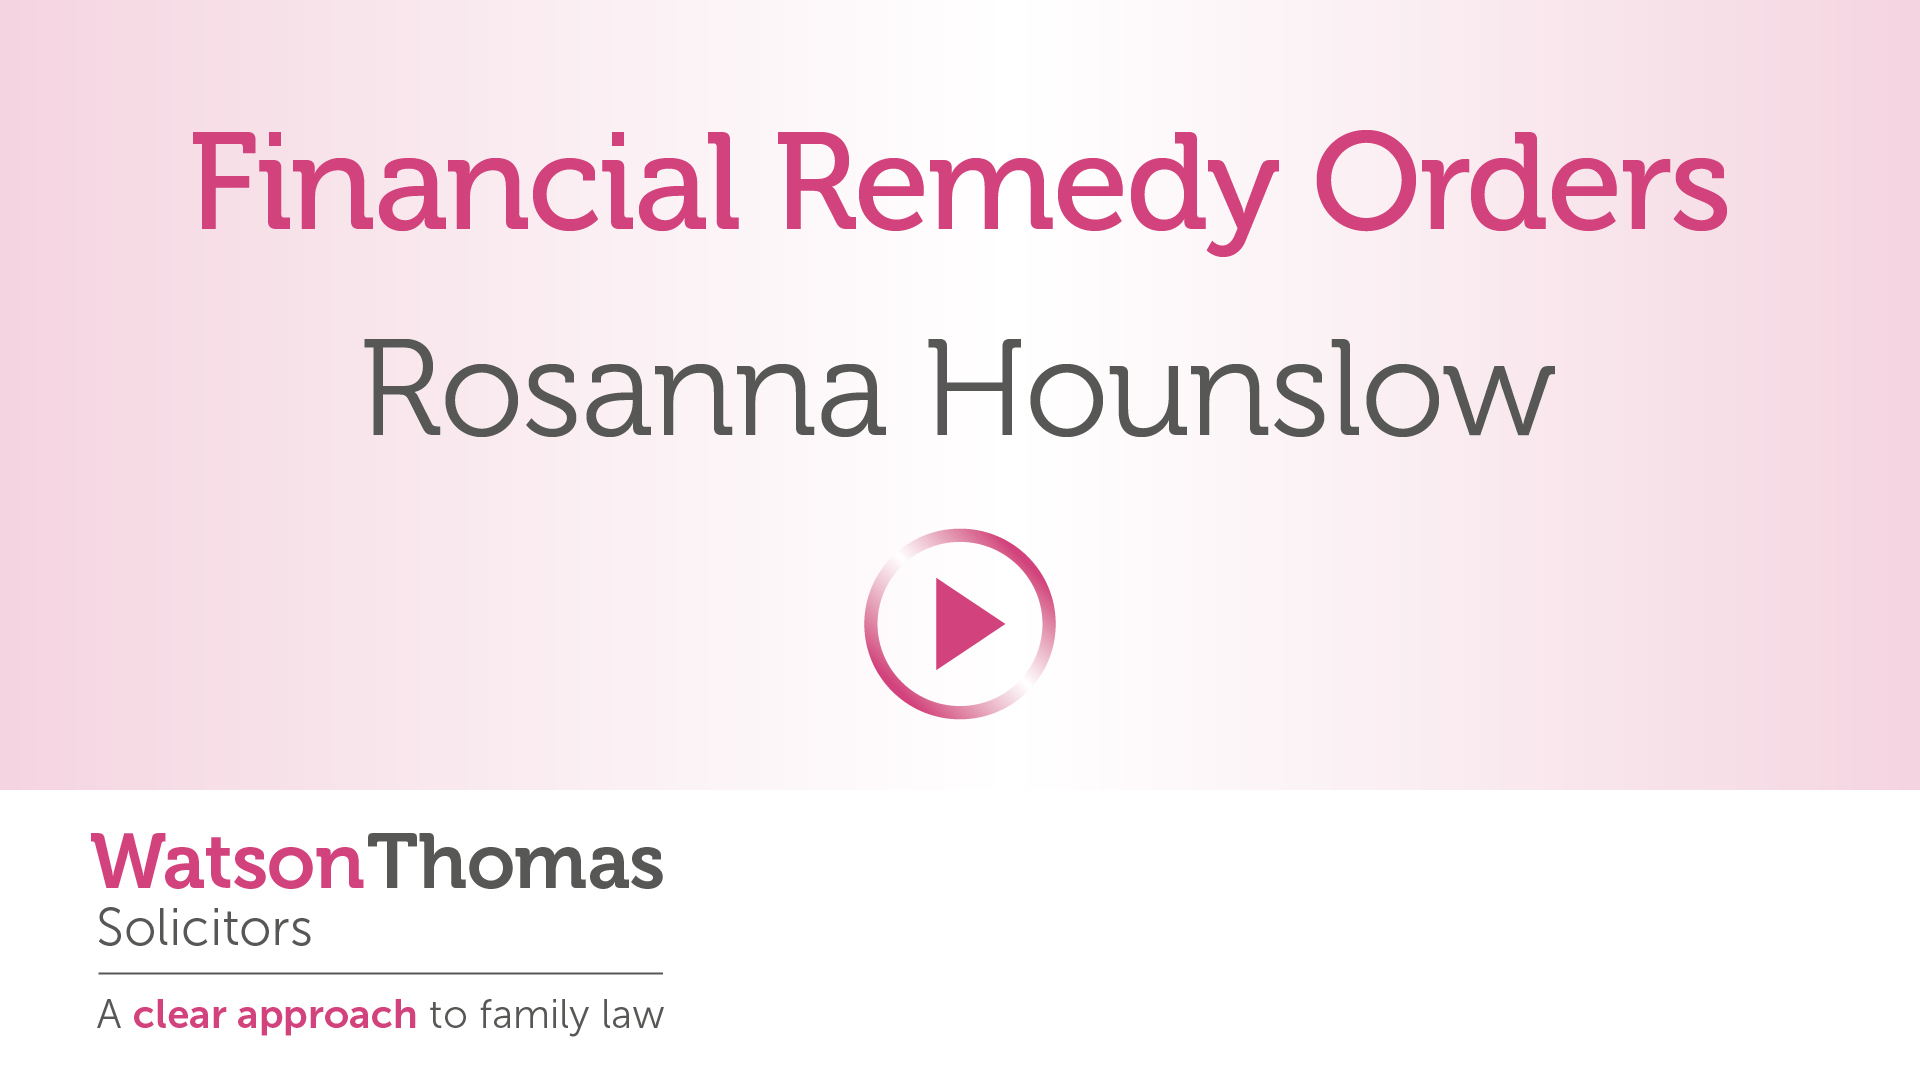 Financial Remedy Orders Explained